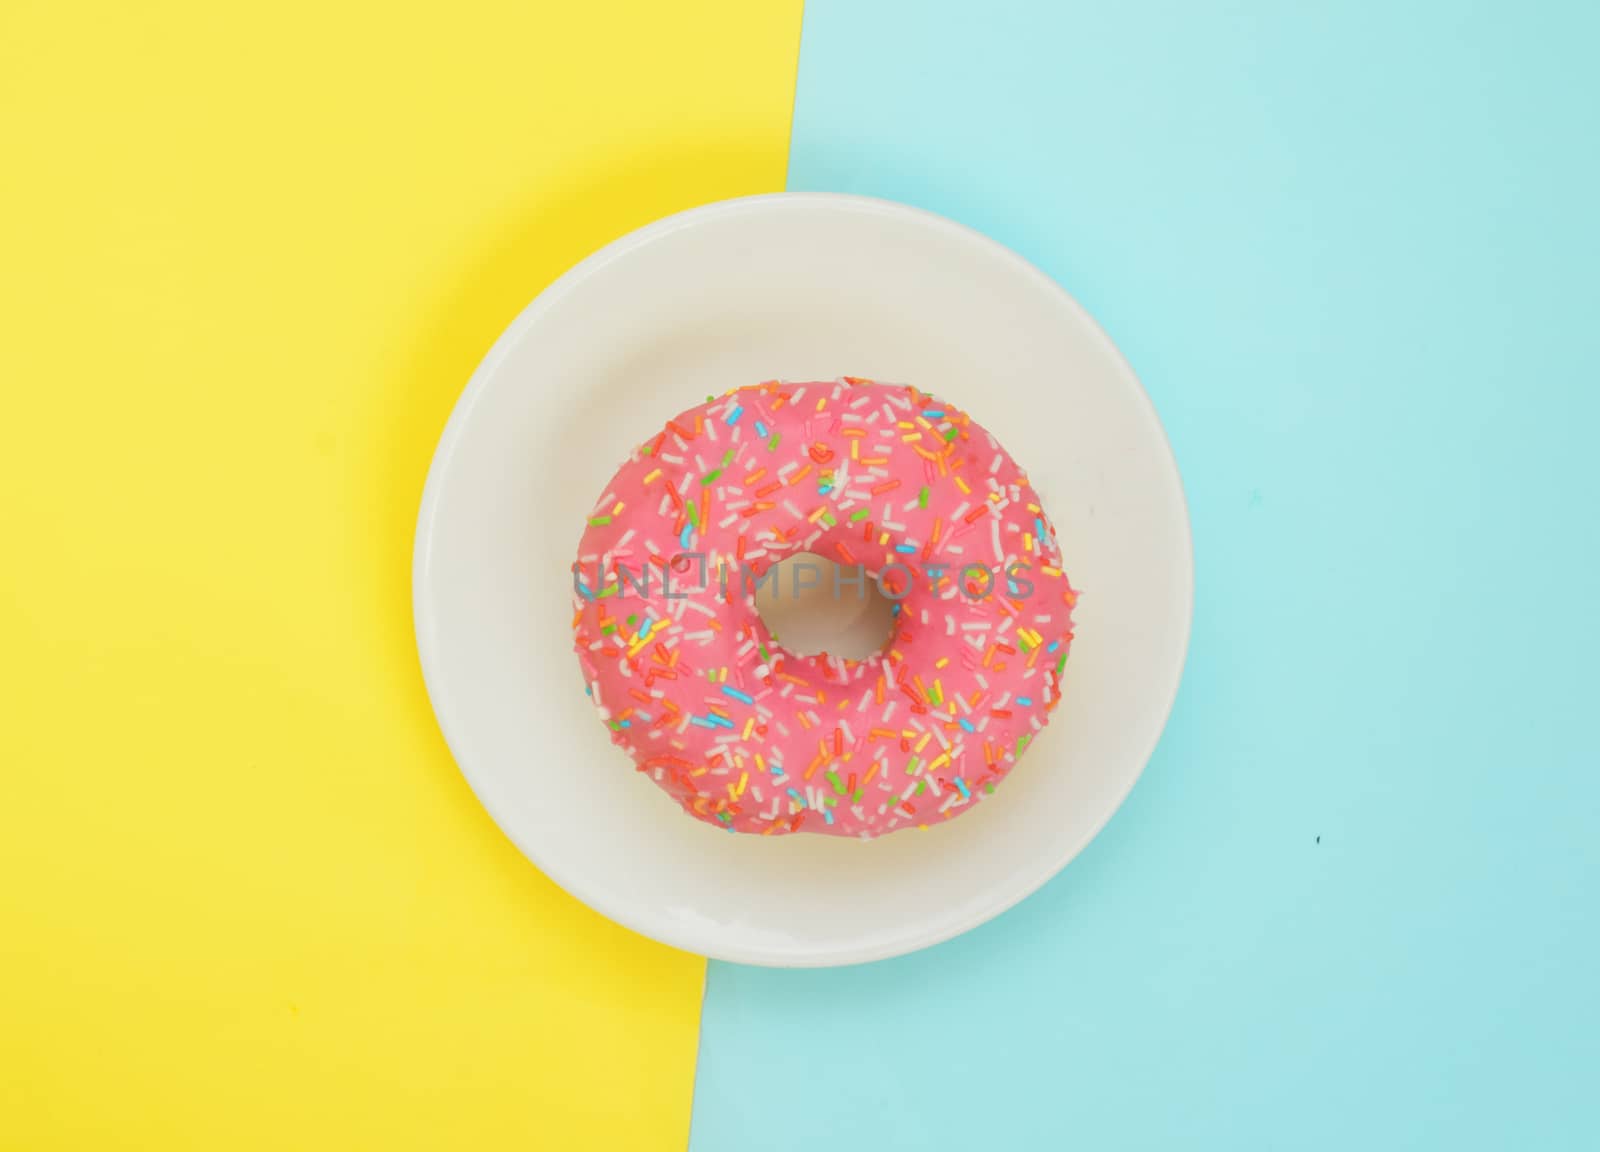 Top view,One pink glazed donut on white plate on pastel yellow turquoise background.Sweet dessert for snack.